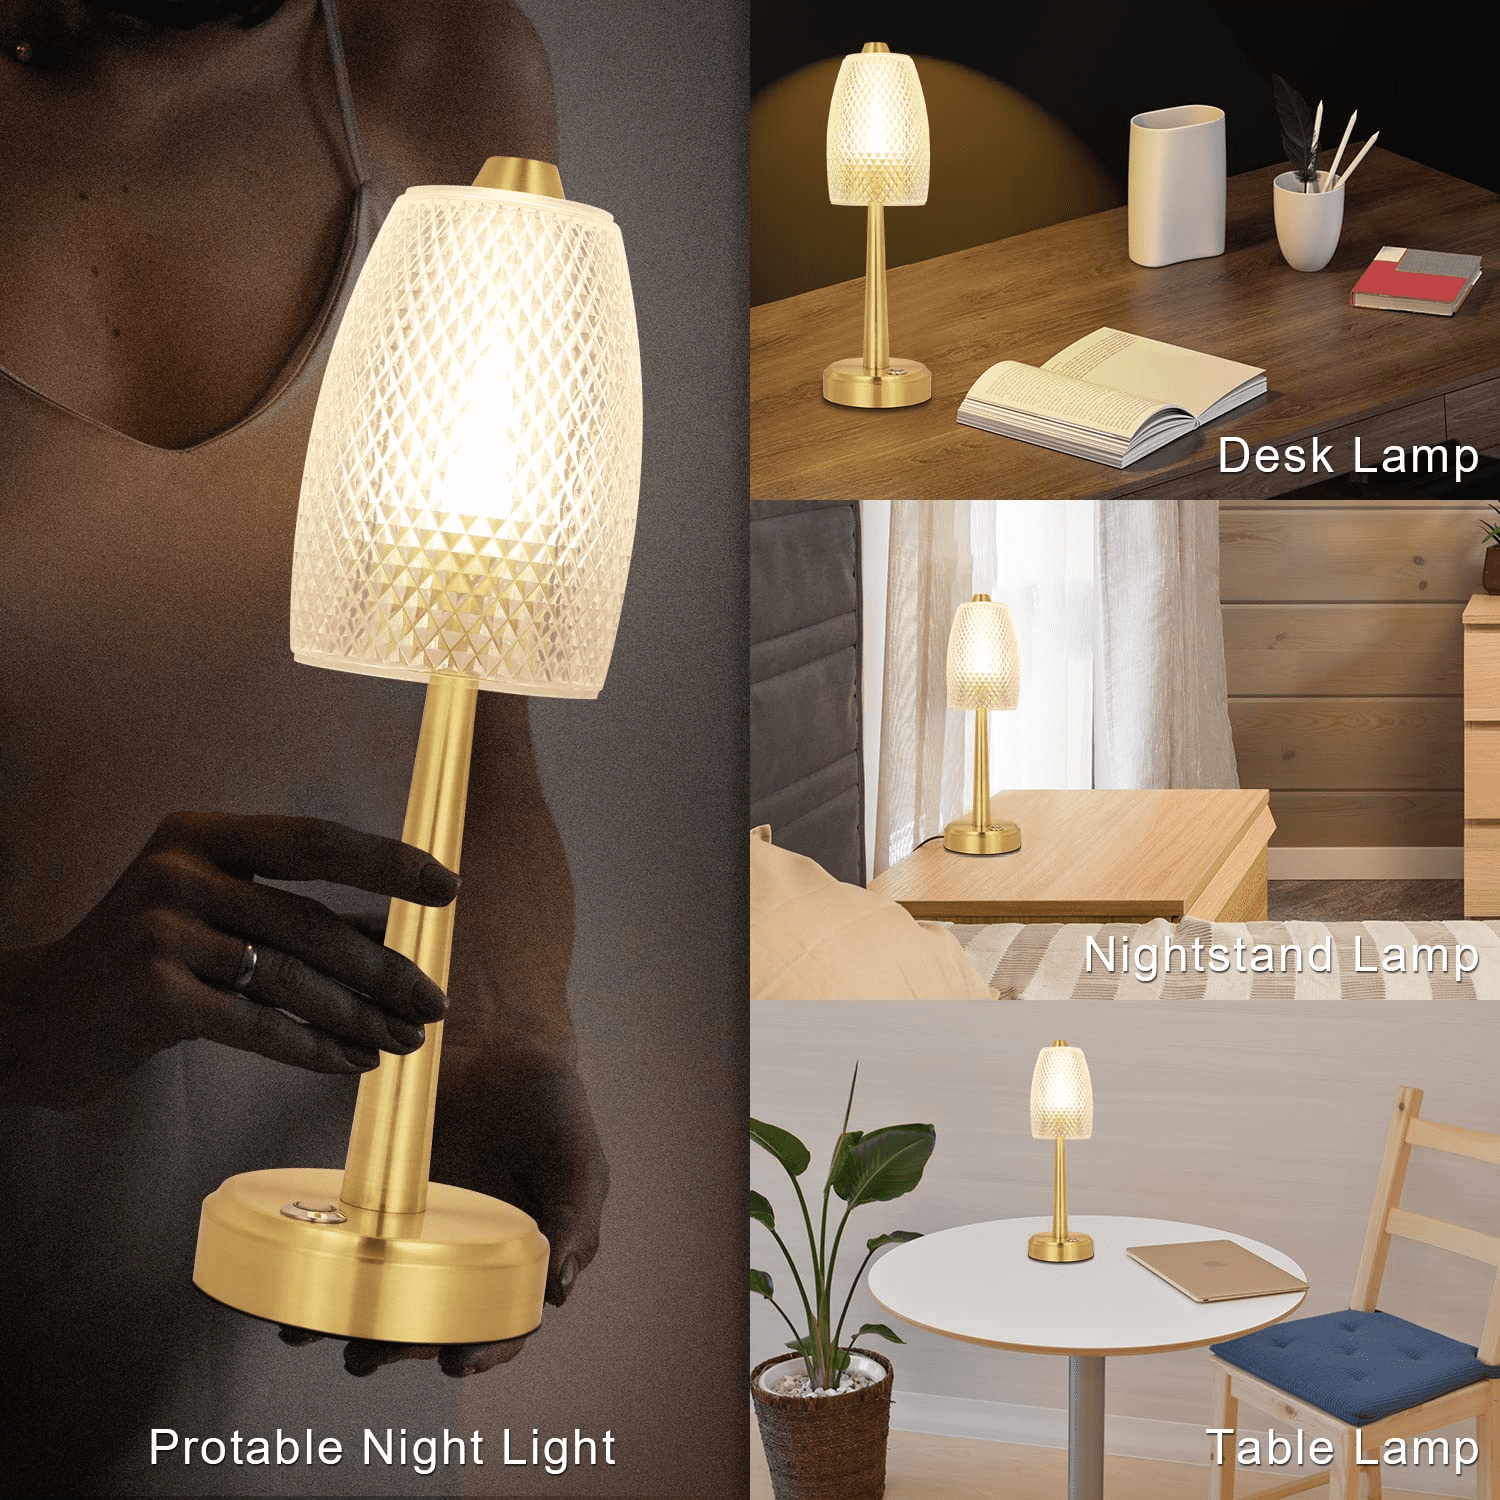 UMEXUS Small Cordless Table Lamp, Rechargeable Battery Operated Lamp, Ambient Lighting Lamp for Restaurant Bar Dining Table Centerpiece Decor